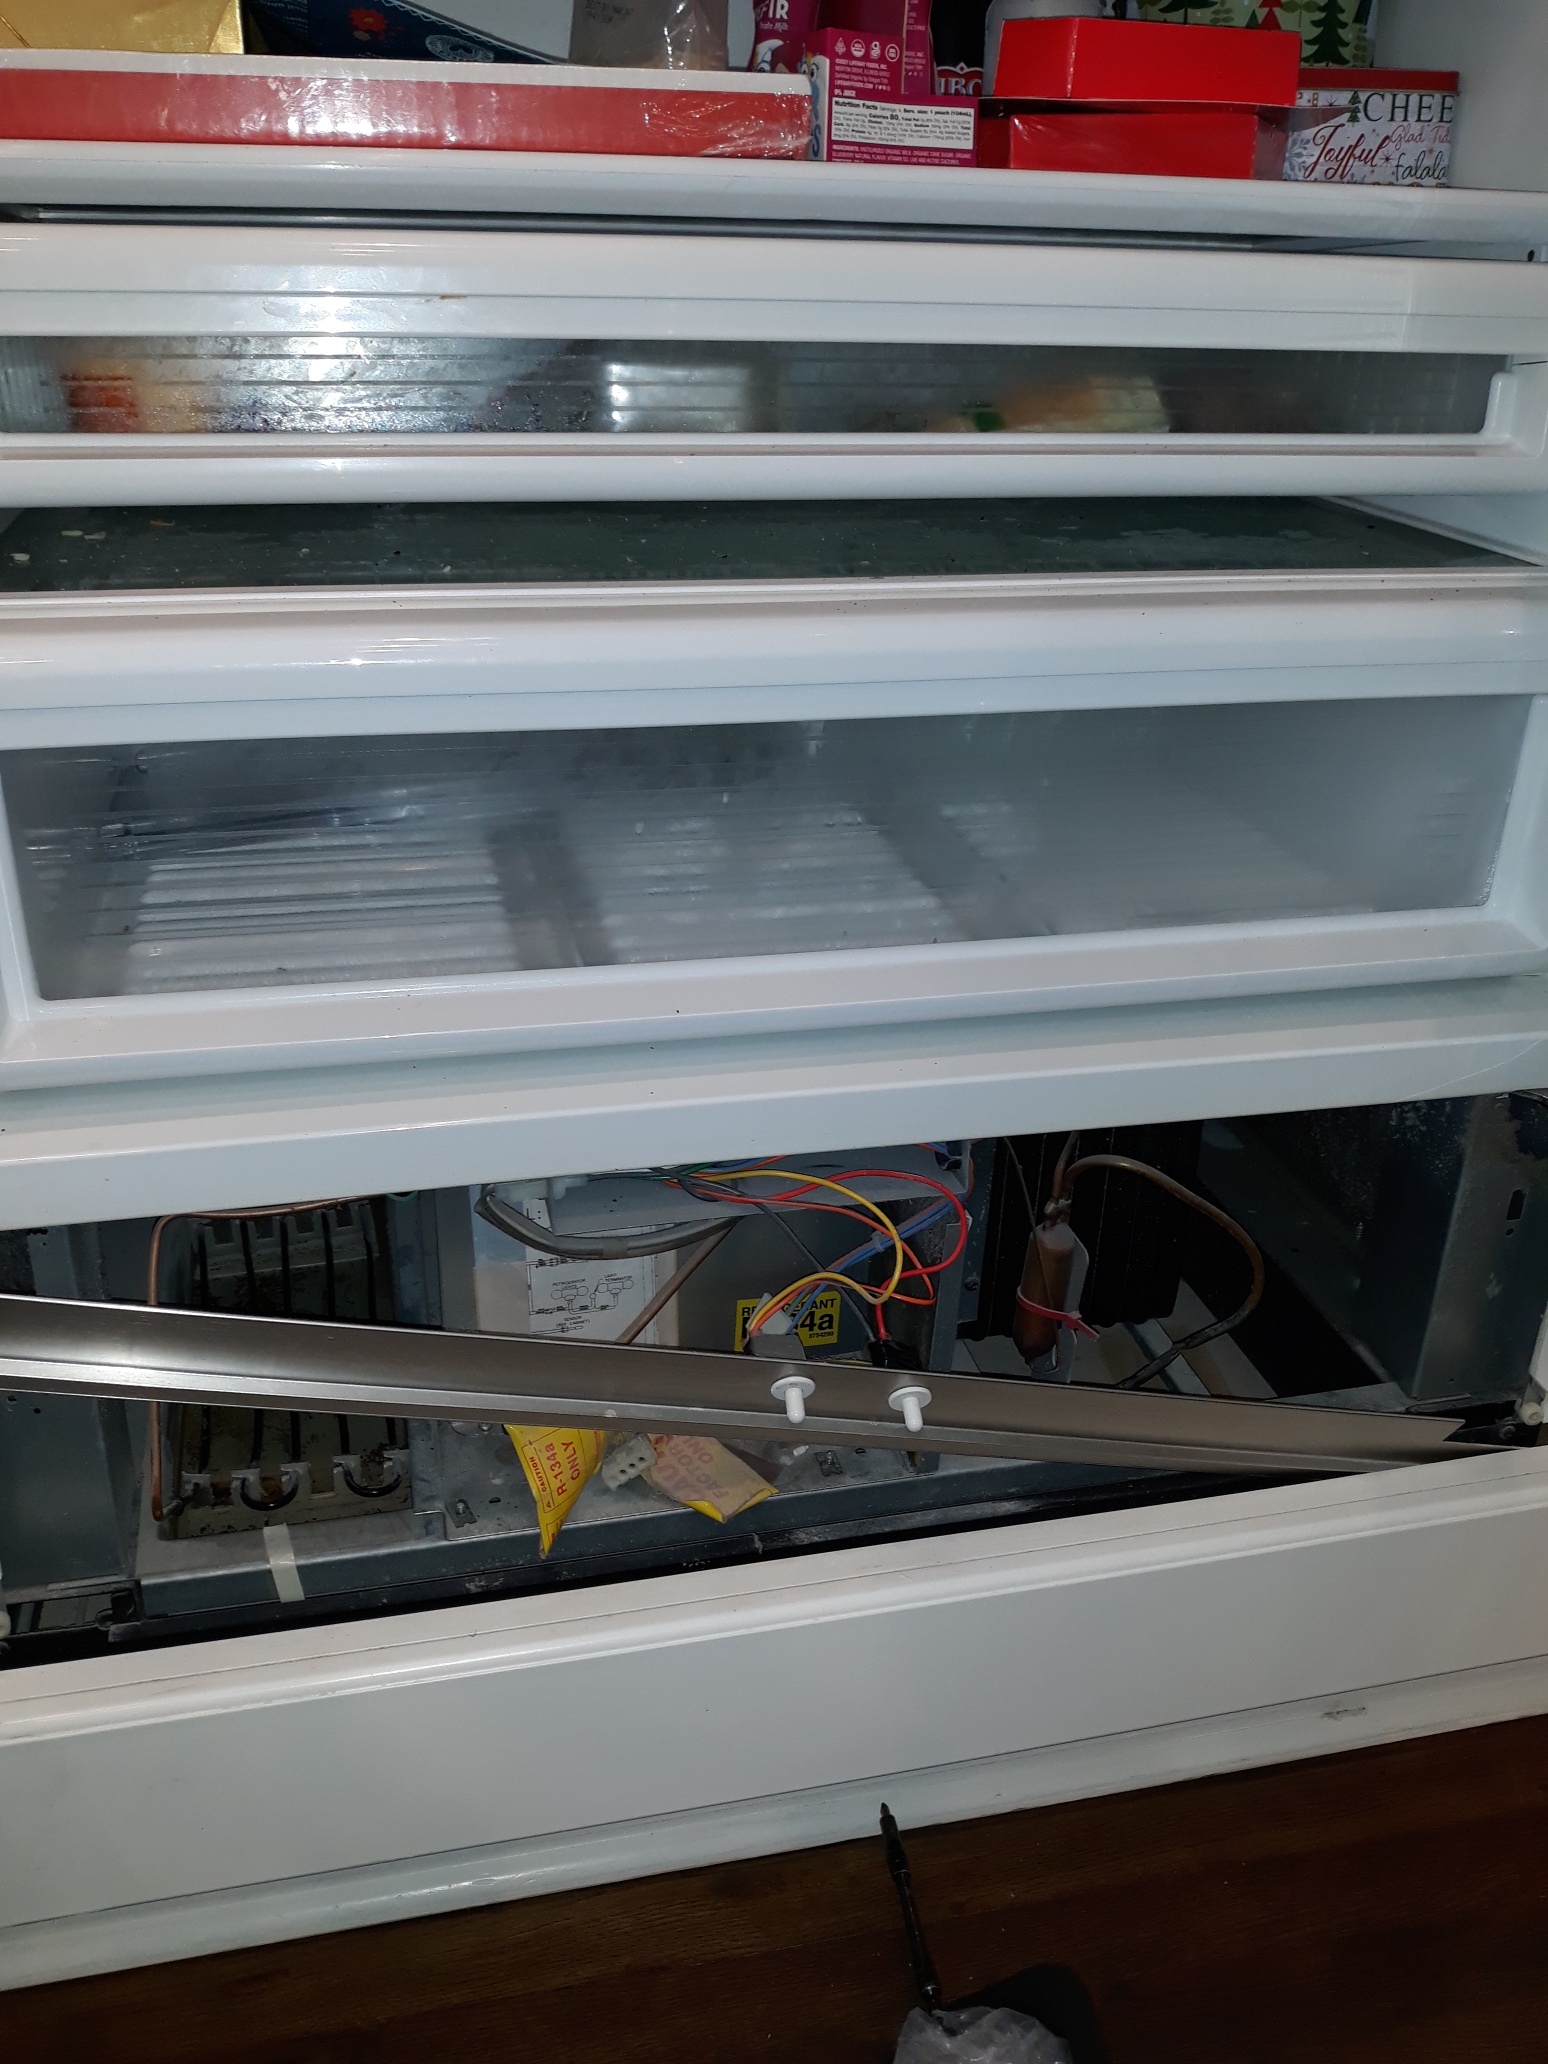 appliance repair refrigerator repair repaired by replacement of the broken fan motor switch southeast 168th kittredge loop the villages fl 32162